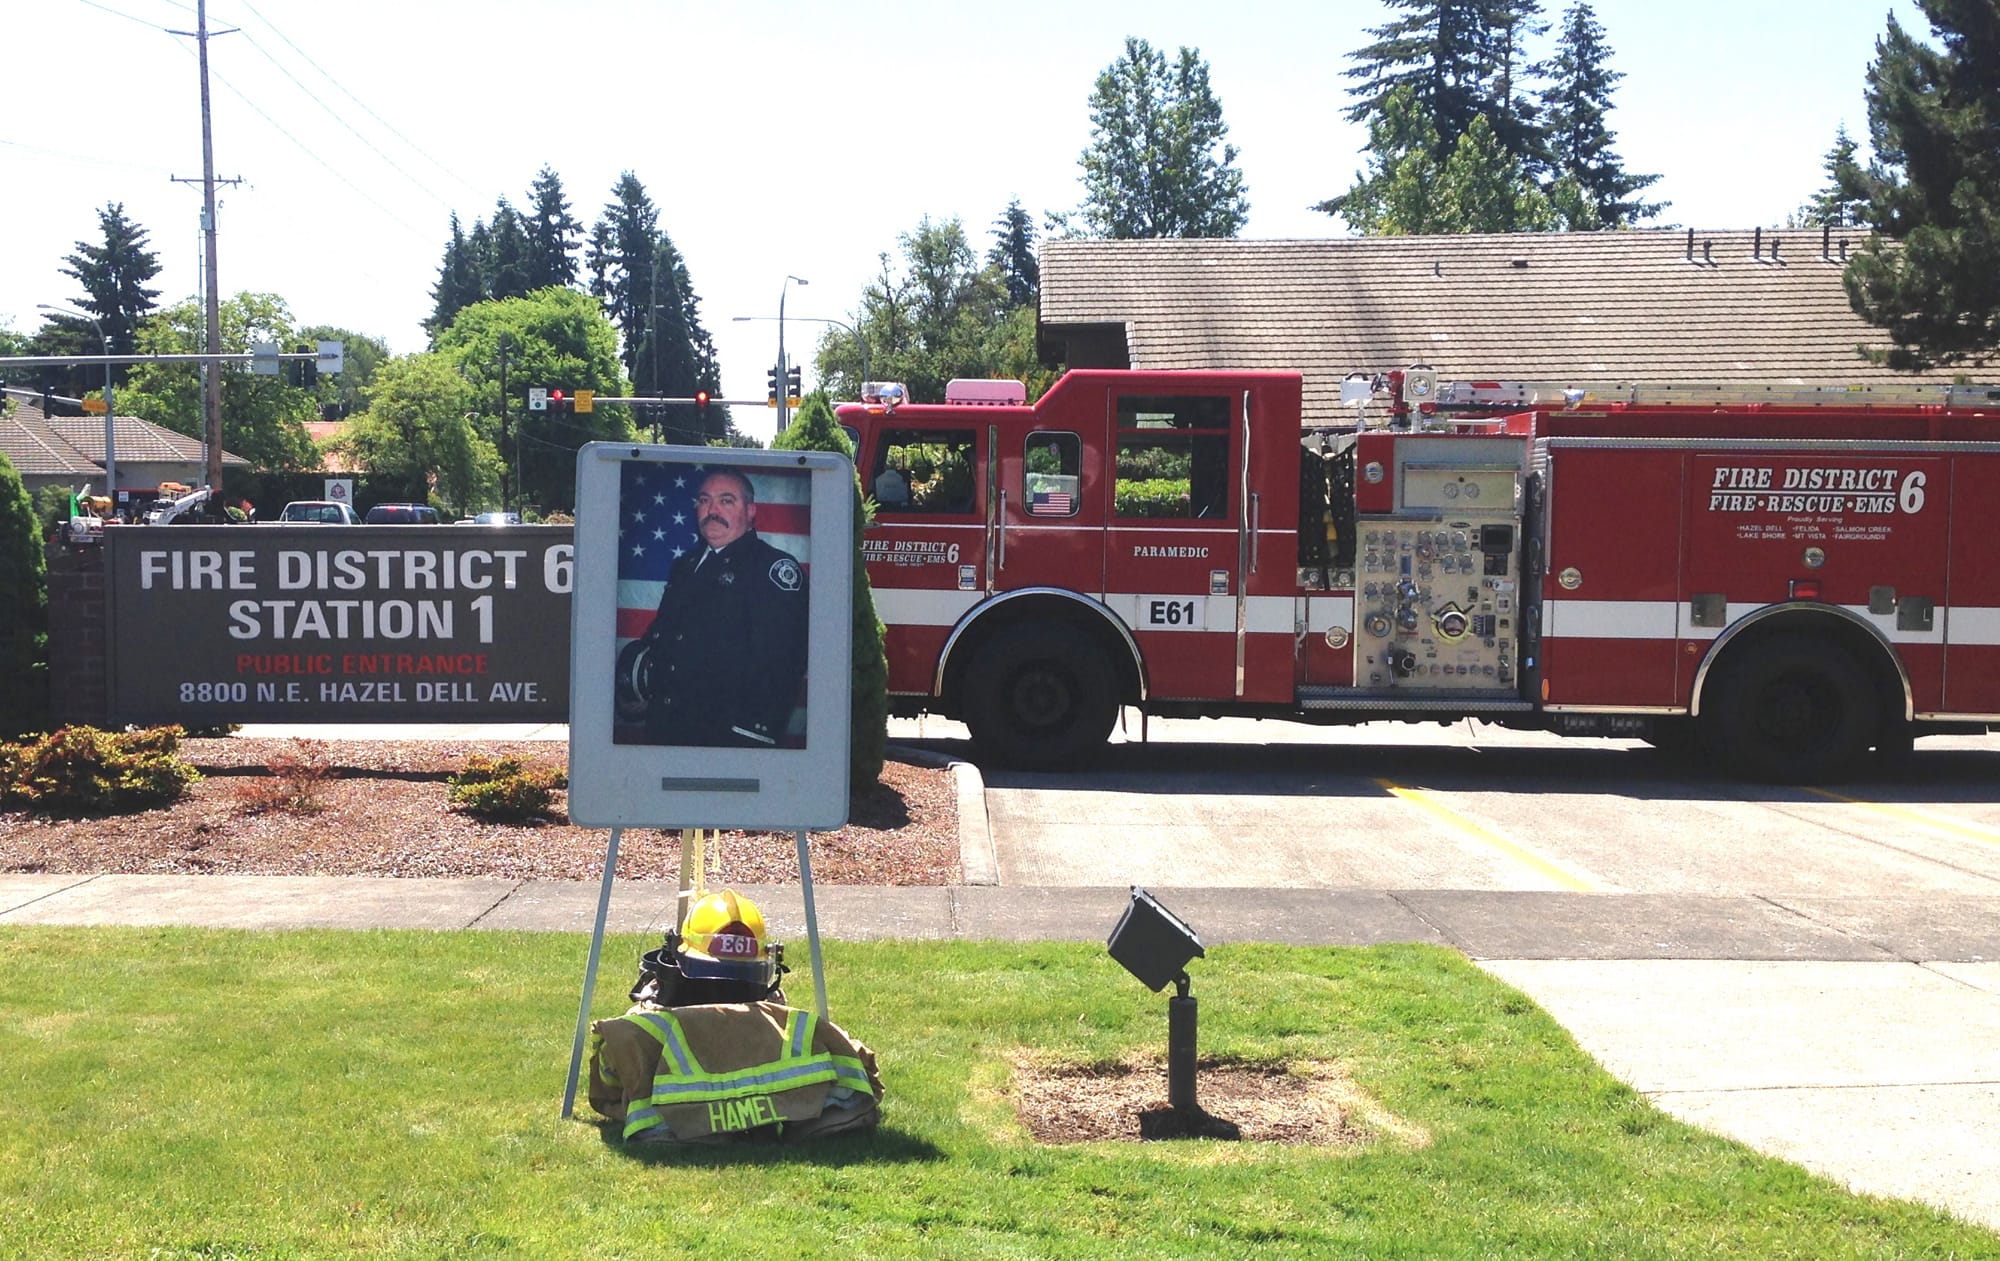 The Hazel Dell station for Fire District 6 hosted a ceremony for Robert Hamel, who died of cancer last summer and will be honored Sunday in a ceremony in Olympia.